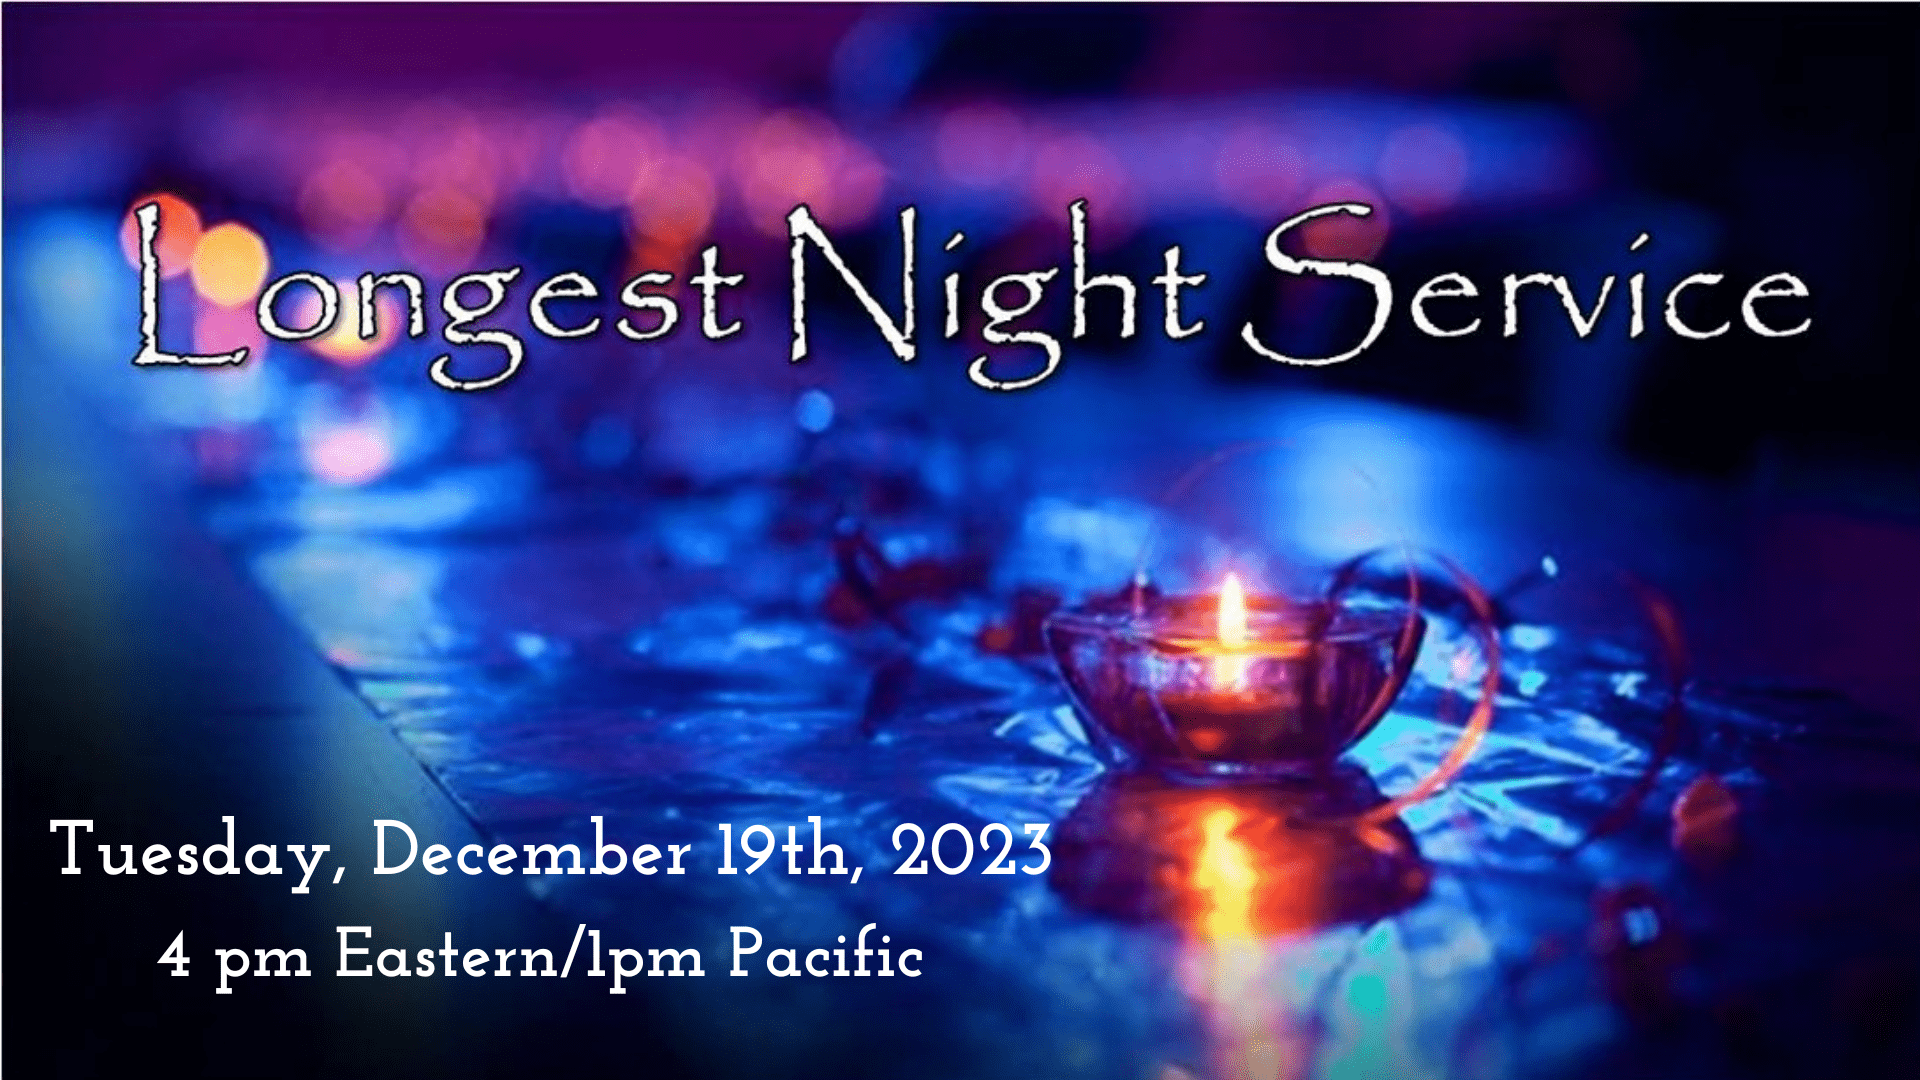 Longest Night Service, Tuesday, December 19th@4pm Eastern/1pm Pacific